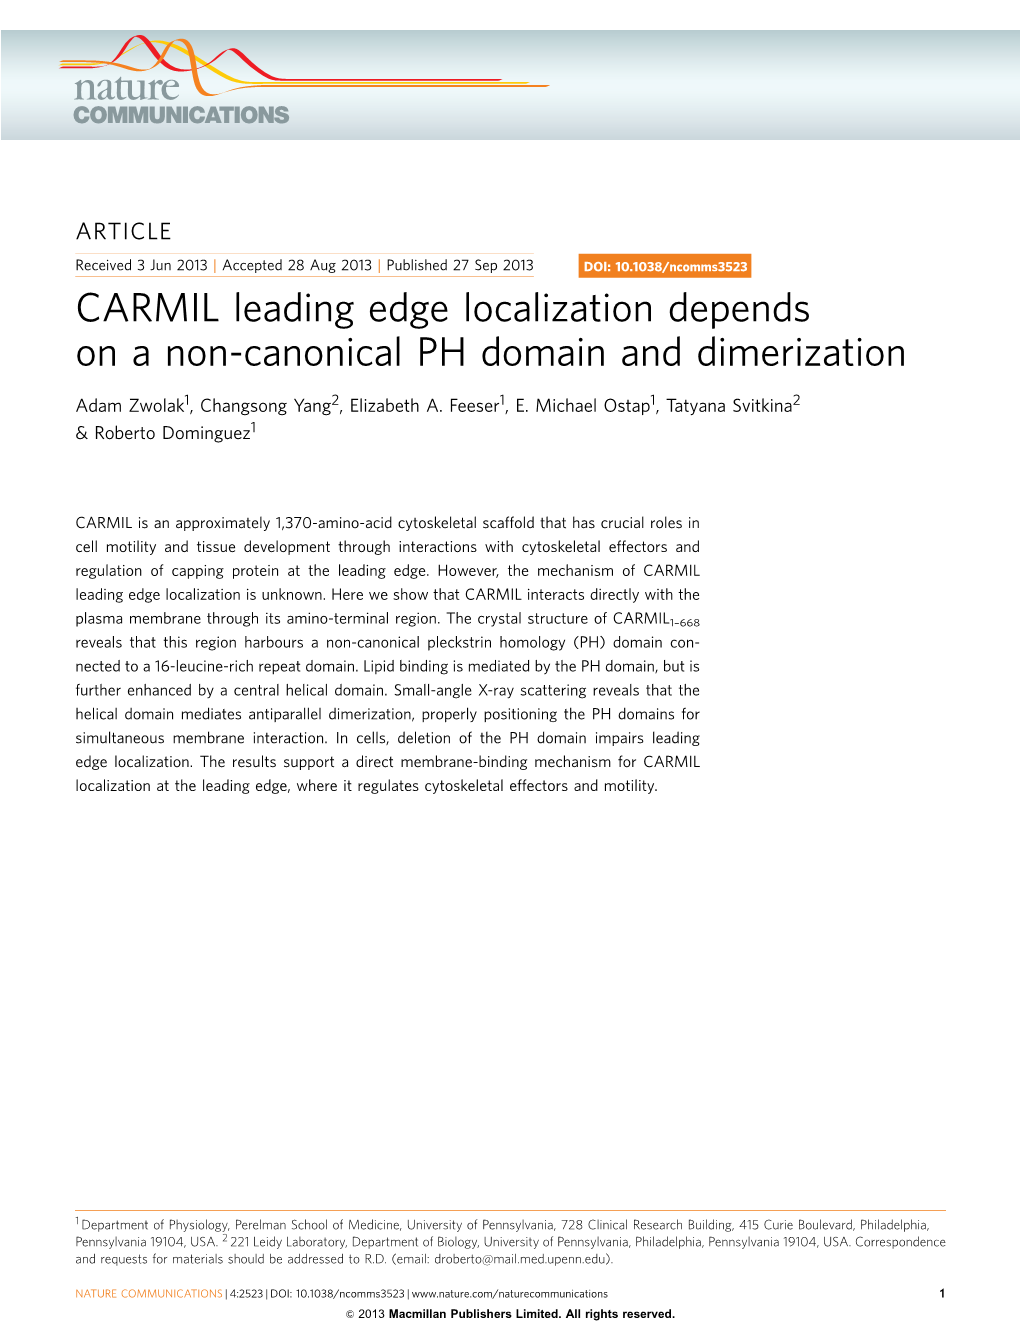 CARMIL Leading Edge Localization Depends on a Non-Canonical PH Domain and Dimerization